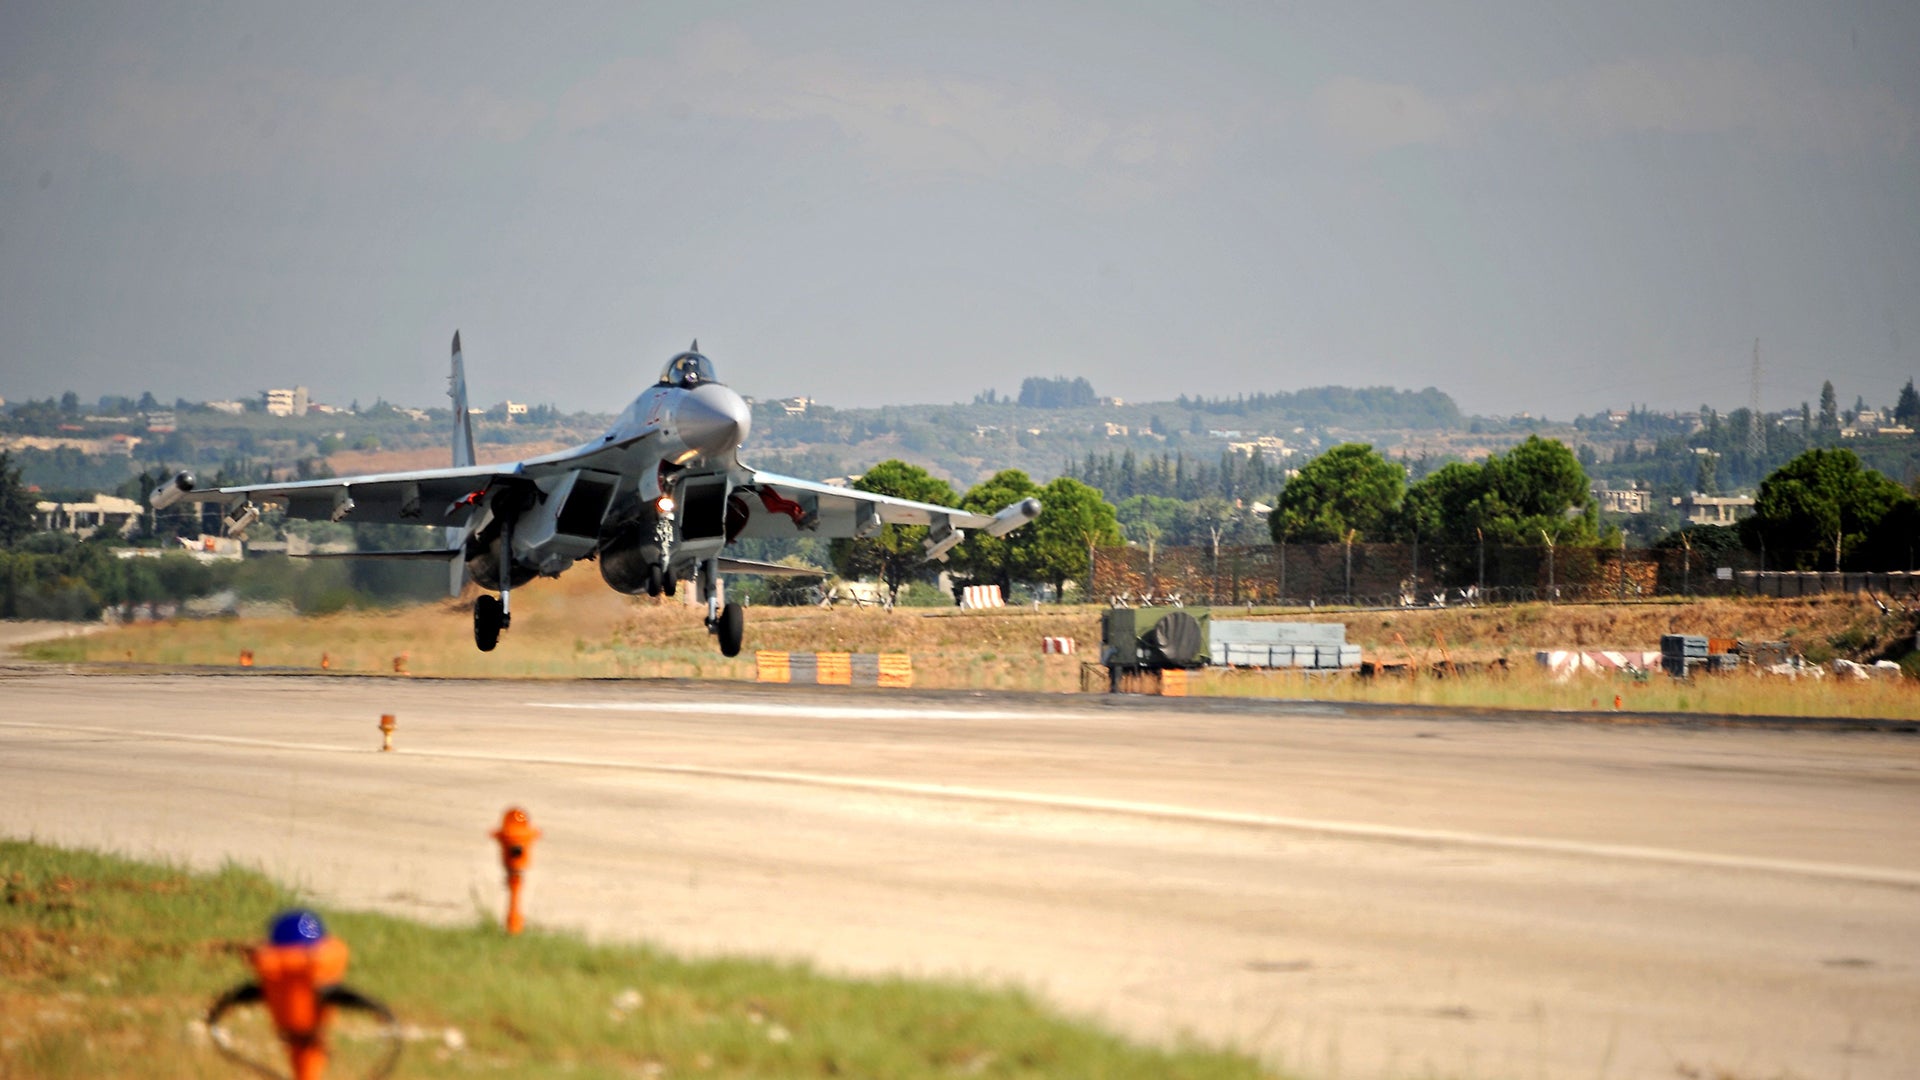 A Russian Sukhoi Su-35 fighter takes off at the Russian military base of Hmeimim, located south-east of the city of Latakia in Hmeimim, Latakia Governorate, Syria, on September 26, 2019. - With military backing from Russia, President Bashar al-Assad's forces have retaken large parts of Syria from rebels and jihadists since 2015, and now control around 60 percent of the country. Russia often refers to troops it deployed in Syria as military advisers even though its forces and warplanes are also directly involved in battles against jihadists and other rebels (Photo by Maxime POPOV / AFP)        (Photo credit should read MAXIME POPOV/AFP via Getty Images)